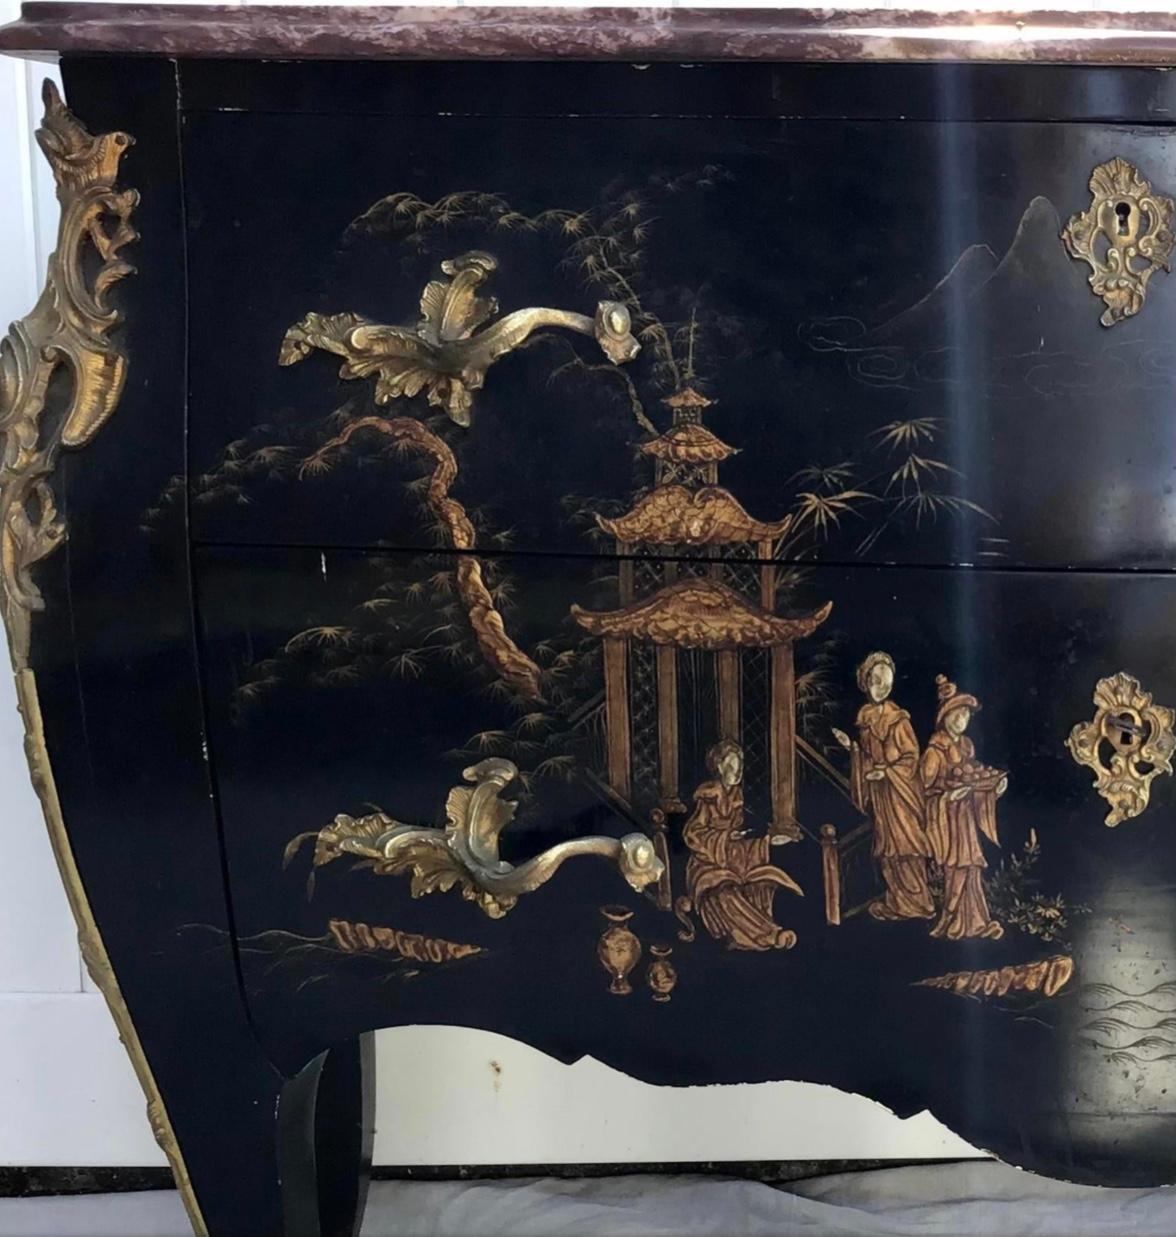 Excellent quality marble top Louis XV commode with Chinoiserie decorated serpentine front commode. Lacquered Chinoiserie designs with intricate raised gilt painted decoration, well-cast gilt-bronze mounts, two drawers with working lock and key, and